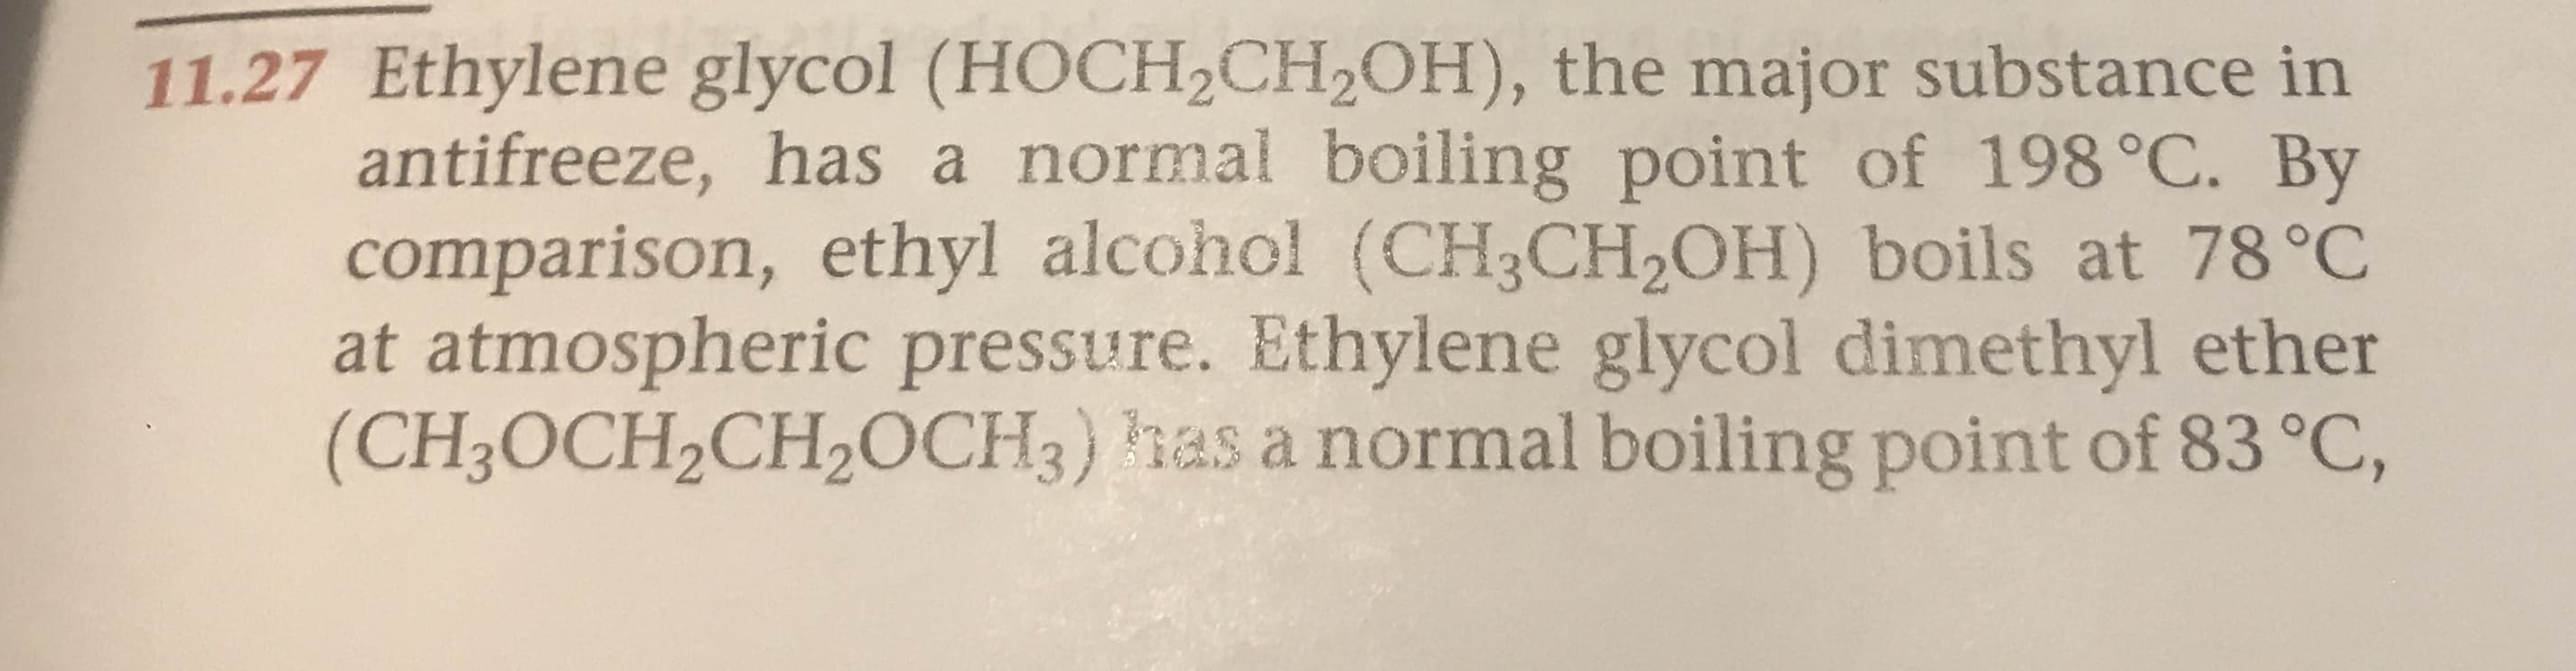 11.27 Ethylene glycol (HOCH2CH2OH), the major substance in
antifreeze, has a normal boiling point of 198°C. By
comparison, ethyl alcohol (CH3CH2OH) boils at 78 °C
at atmospheric pressure. Ethylene glycol dimethyl ether
(CH3OCH2CH2OCH3) has a normal boiling point of 83 °C,
